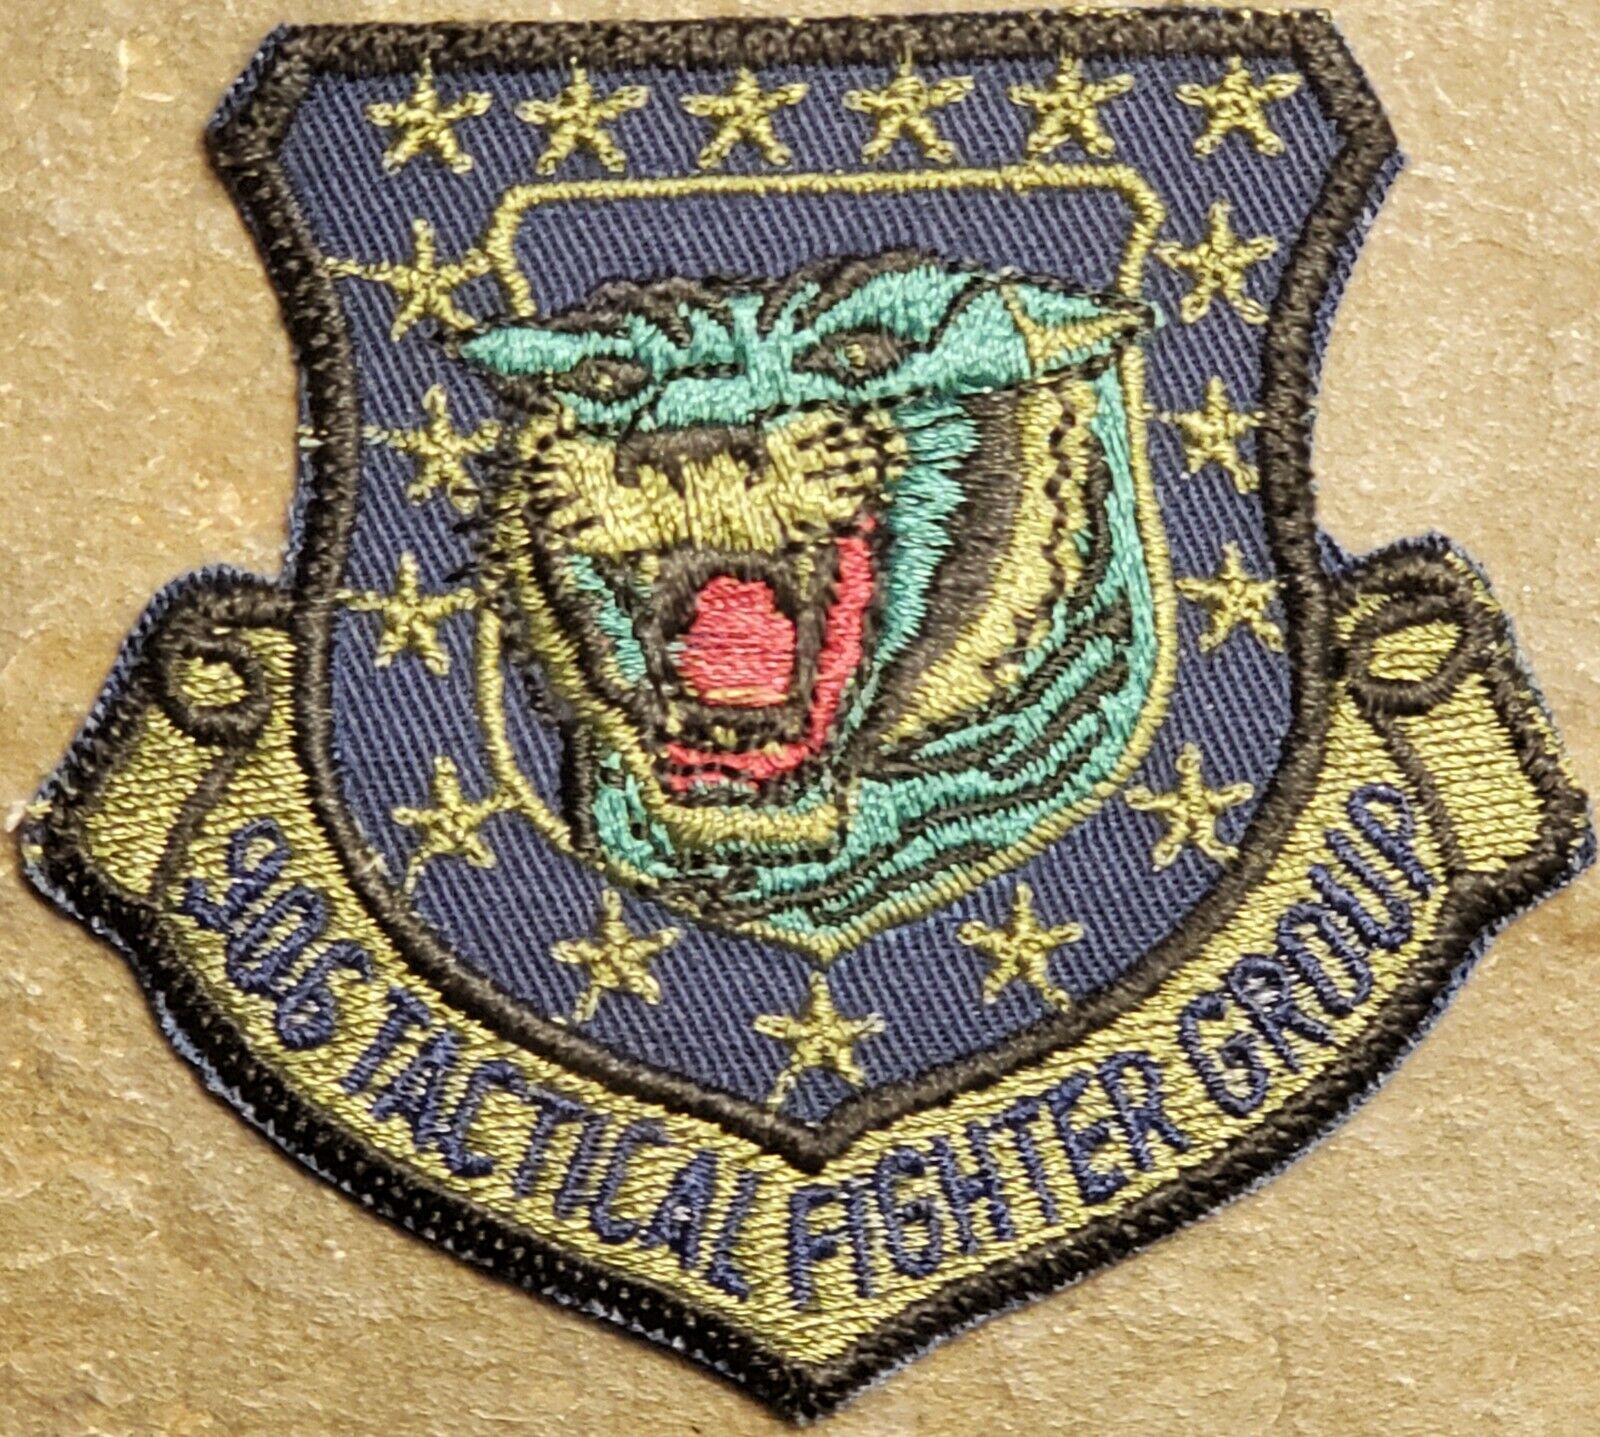 USAF AIR FORCE: 906th TACTICAL FIGHTER GROUP PATCH: WRIGHT-PATTERSON AFB, OH SUB